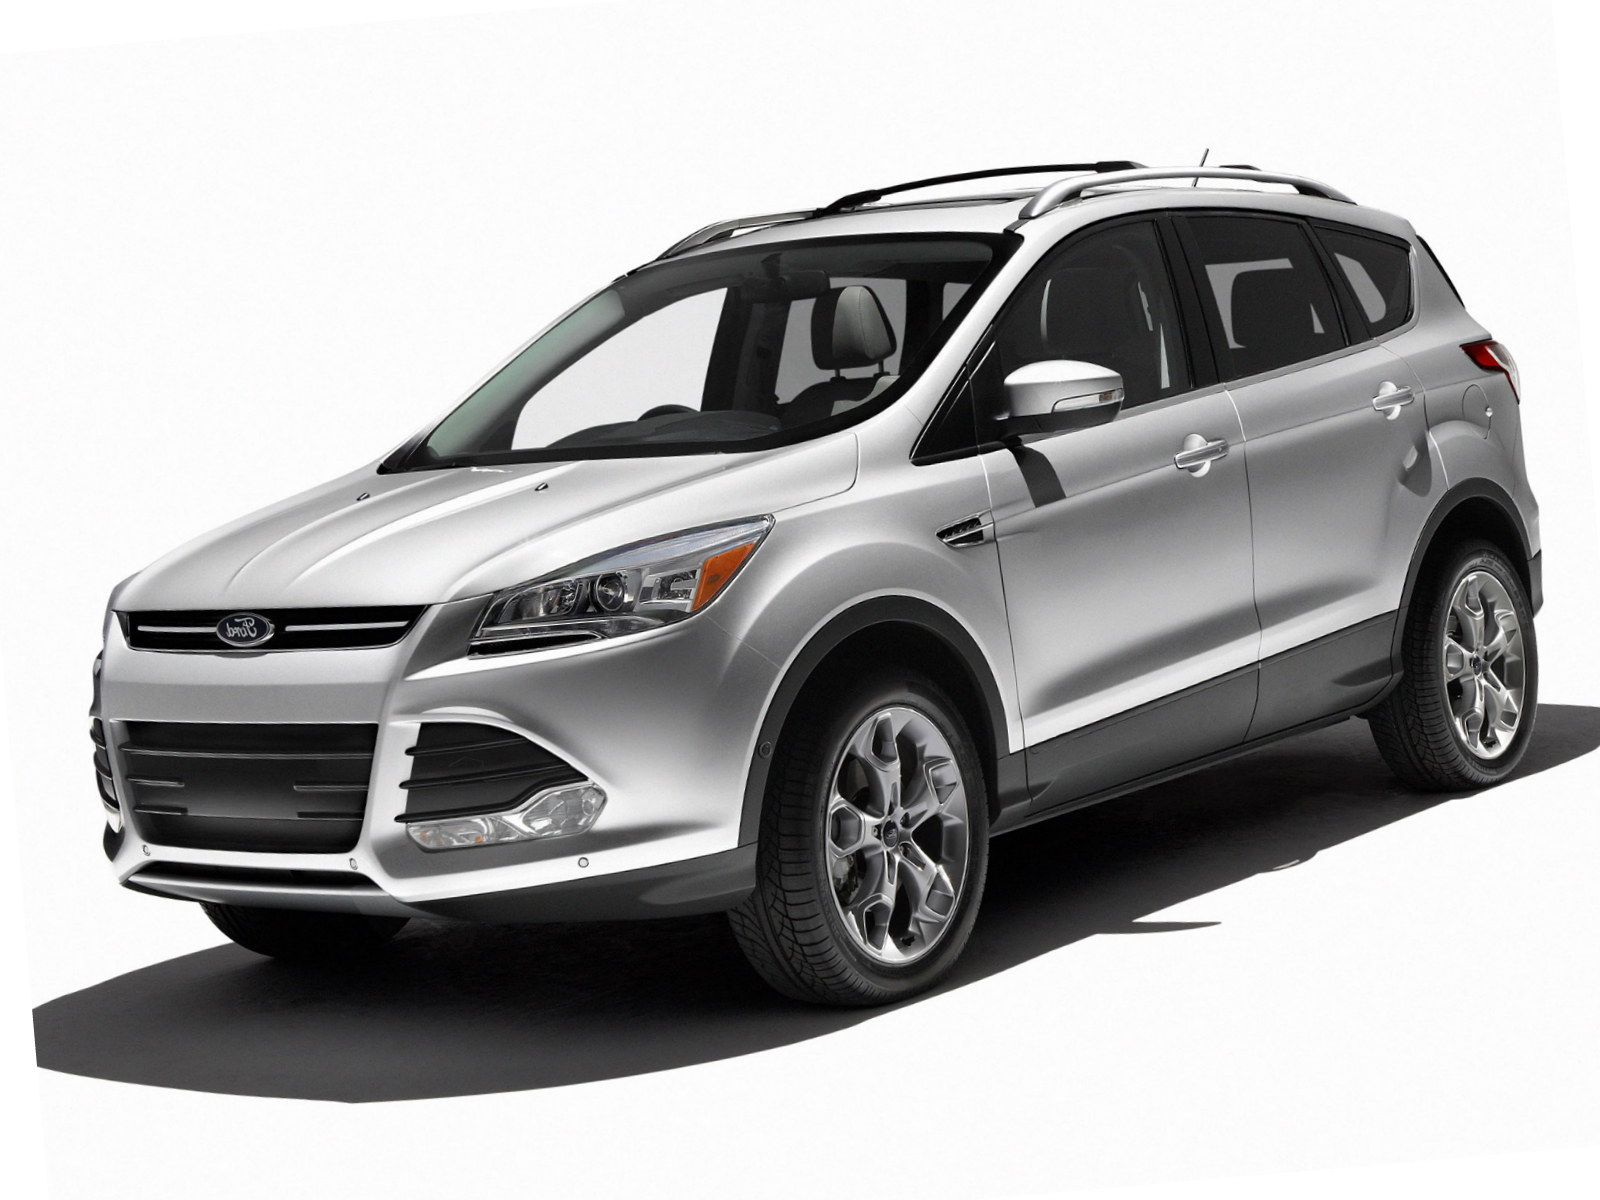 2012 Ford escape technical specifications #7